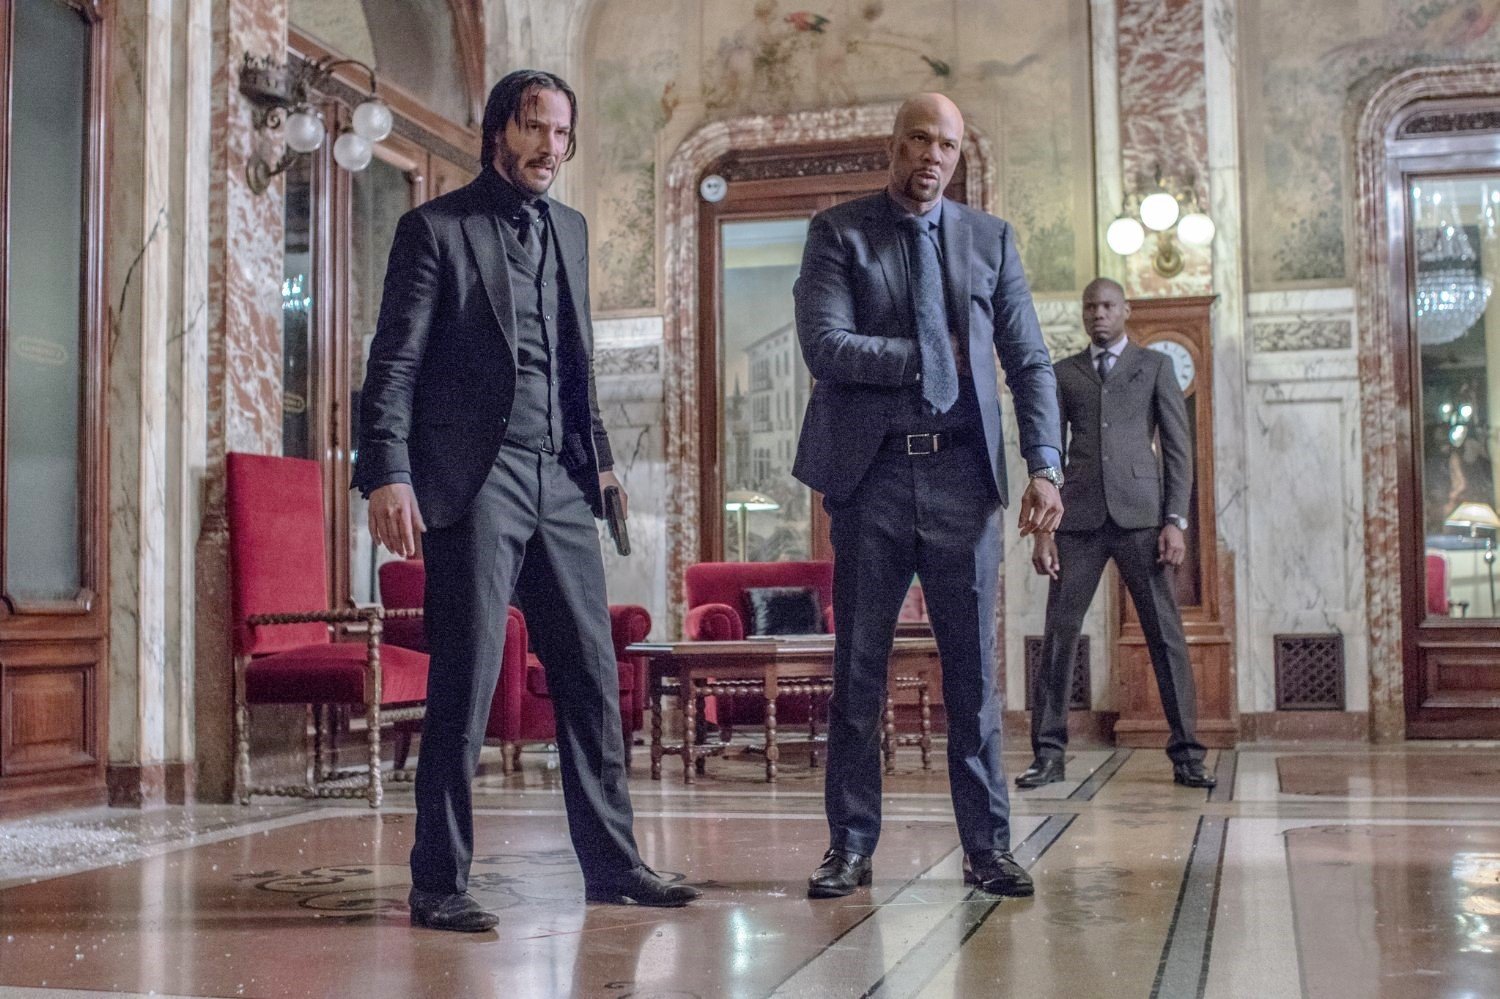 Keanu Reeves (John Wick) and Common in Summit Entertainment's John Wick: Chapter 2 (2017)